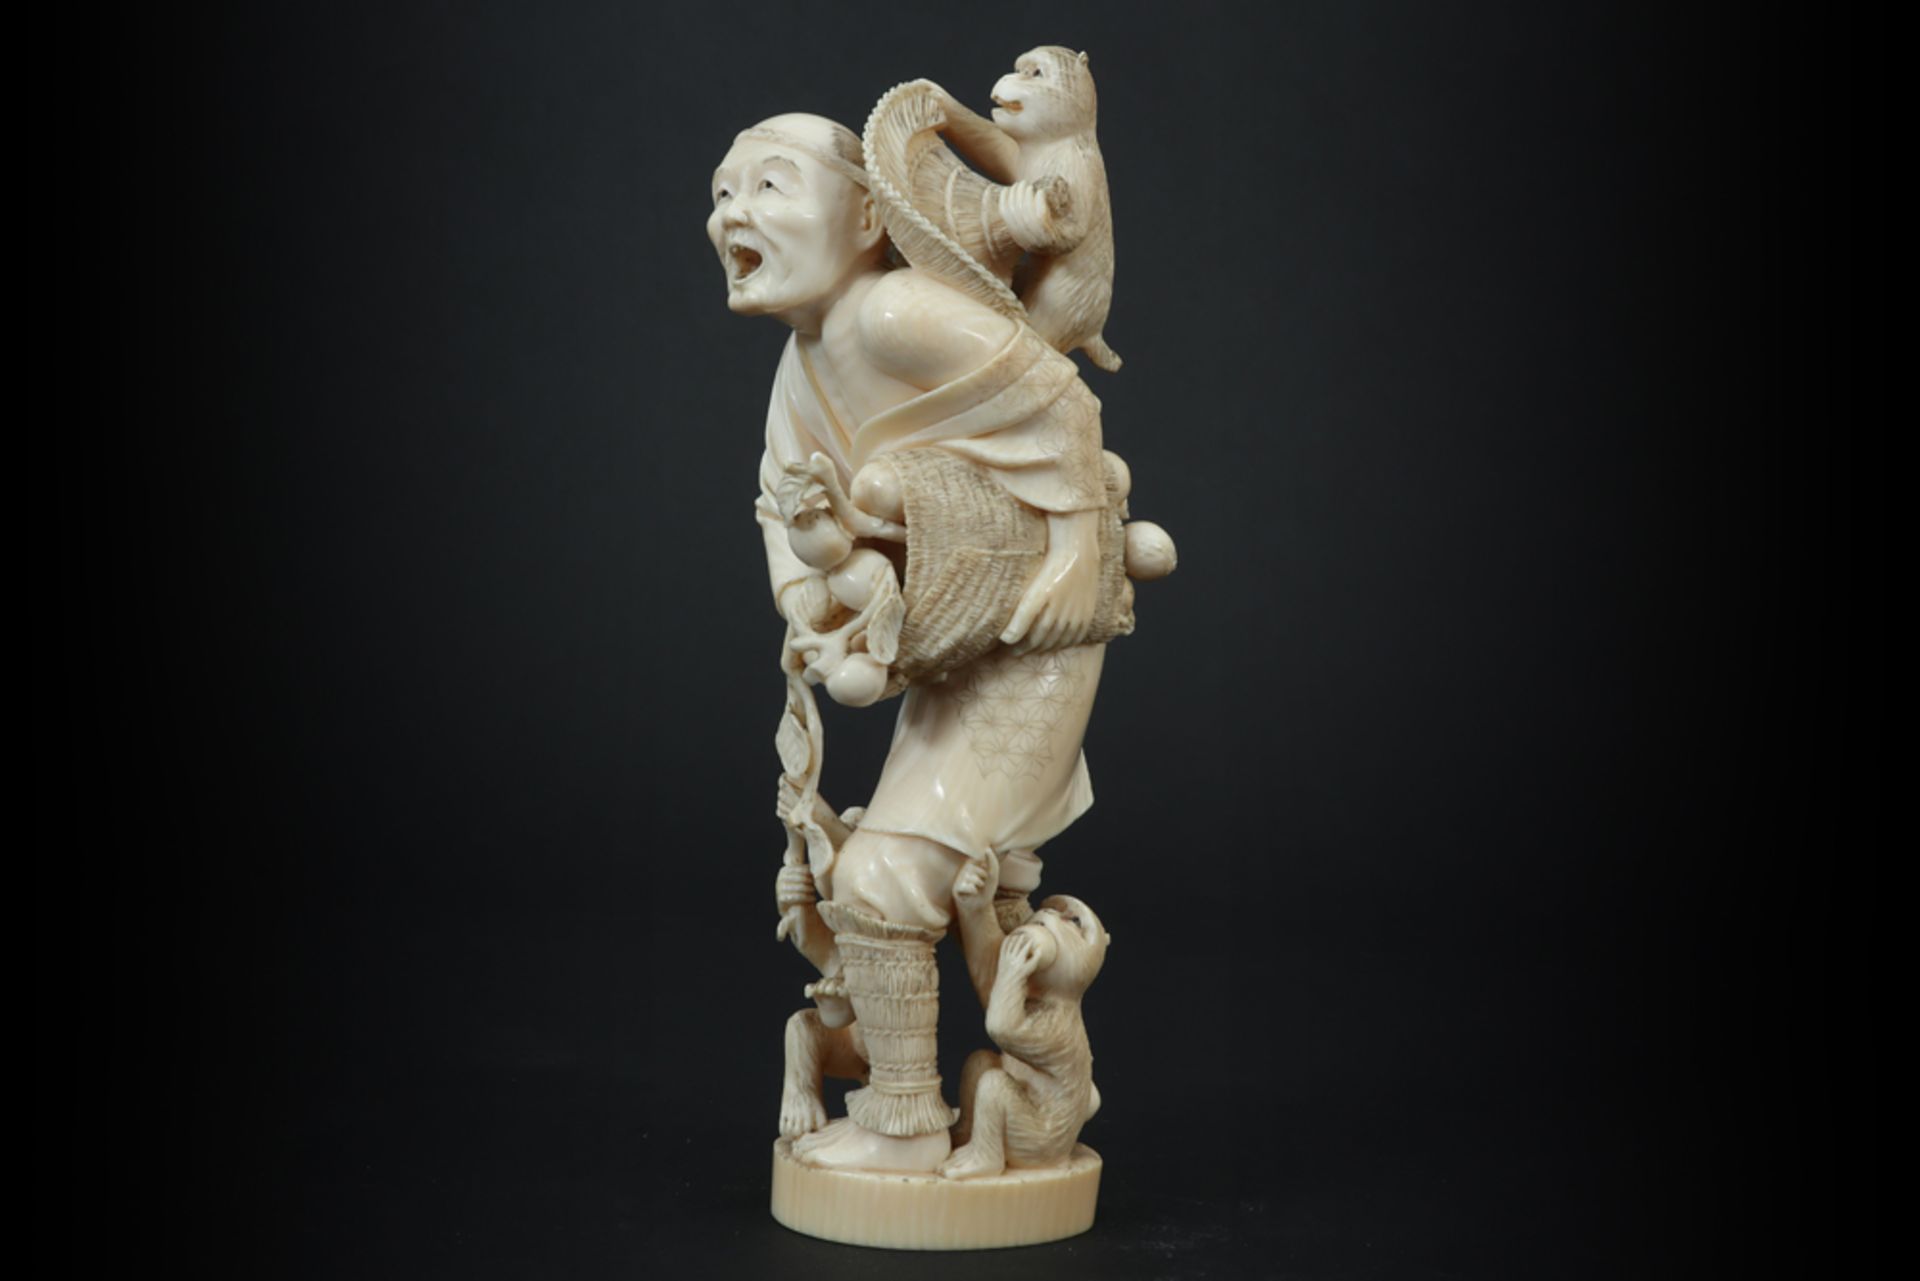 19th Cent. Japanese "Farmer with monkeys" sculpture in marked ivory - with EU CITES certification || - Image 5 of 7